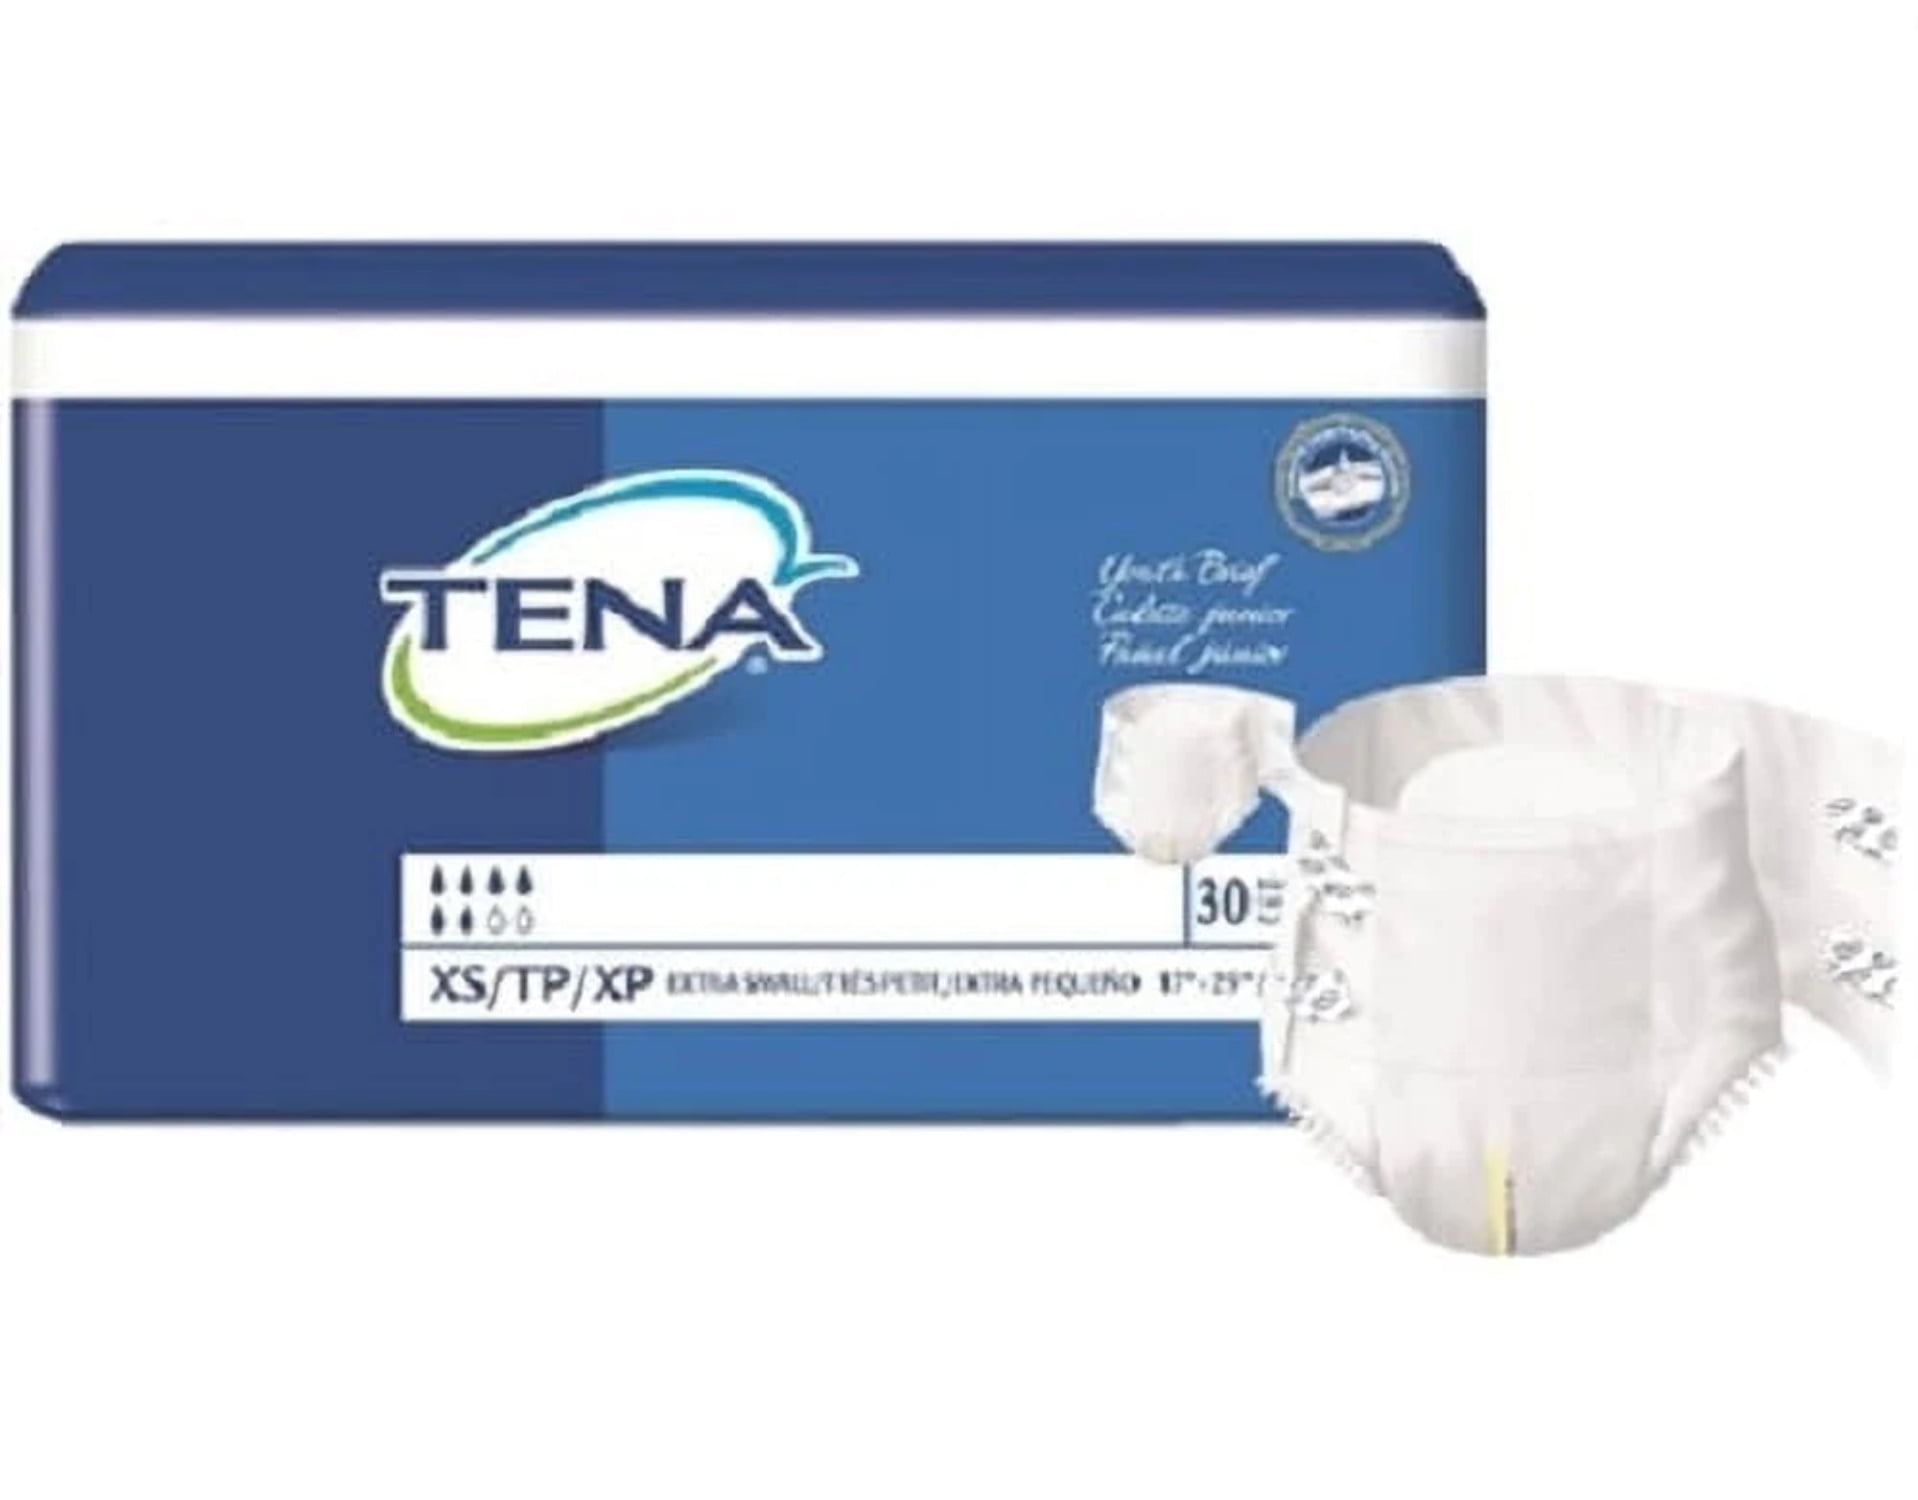 TENA ProSkin XS Youth Super Briefs - Moderate Absorbency